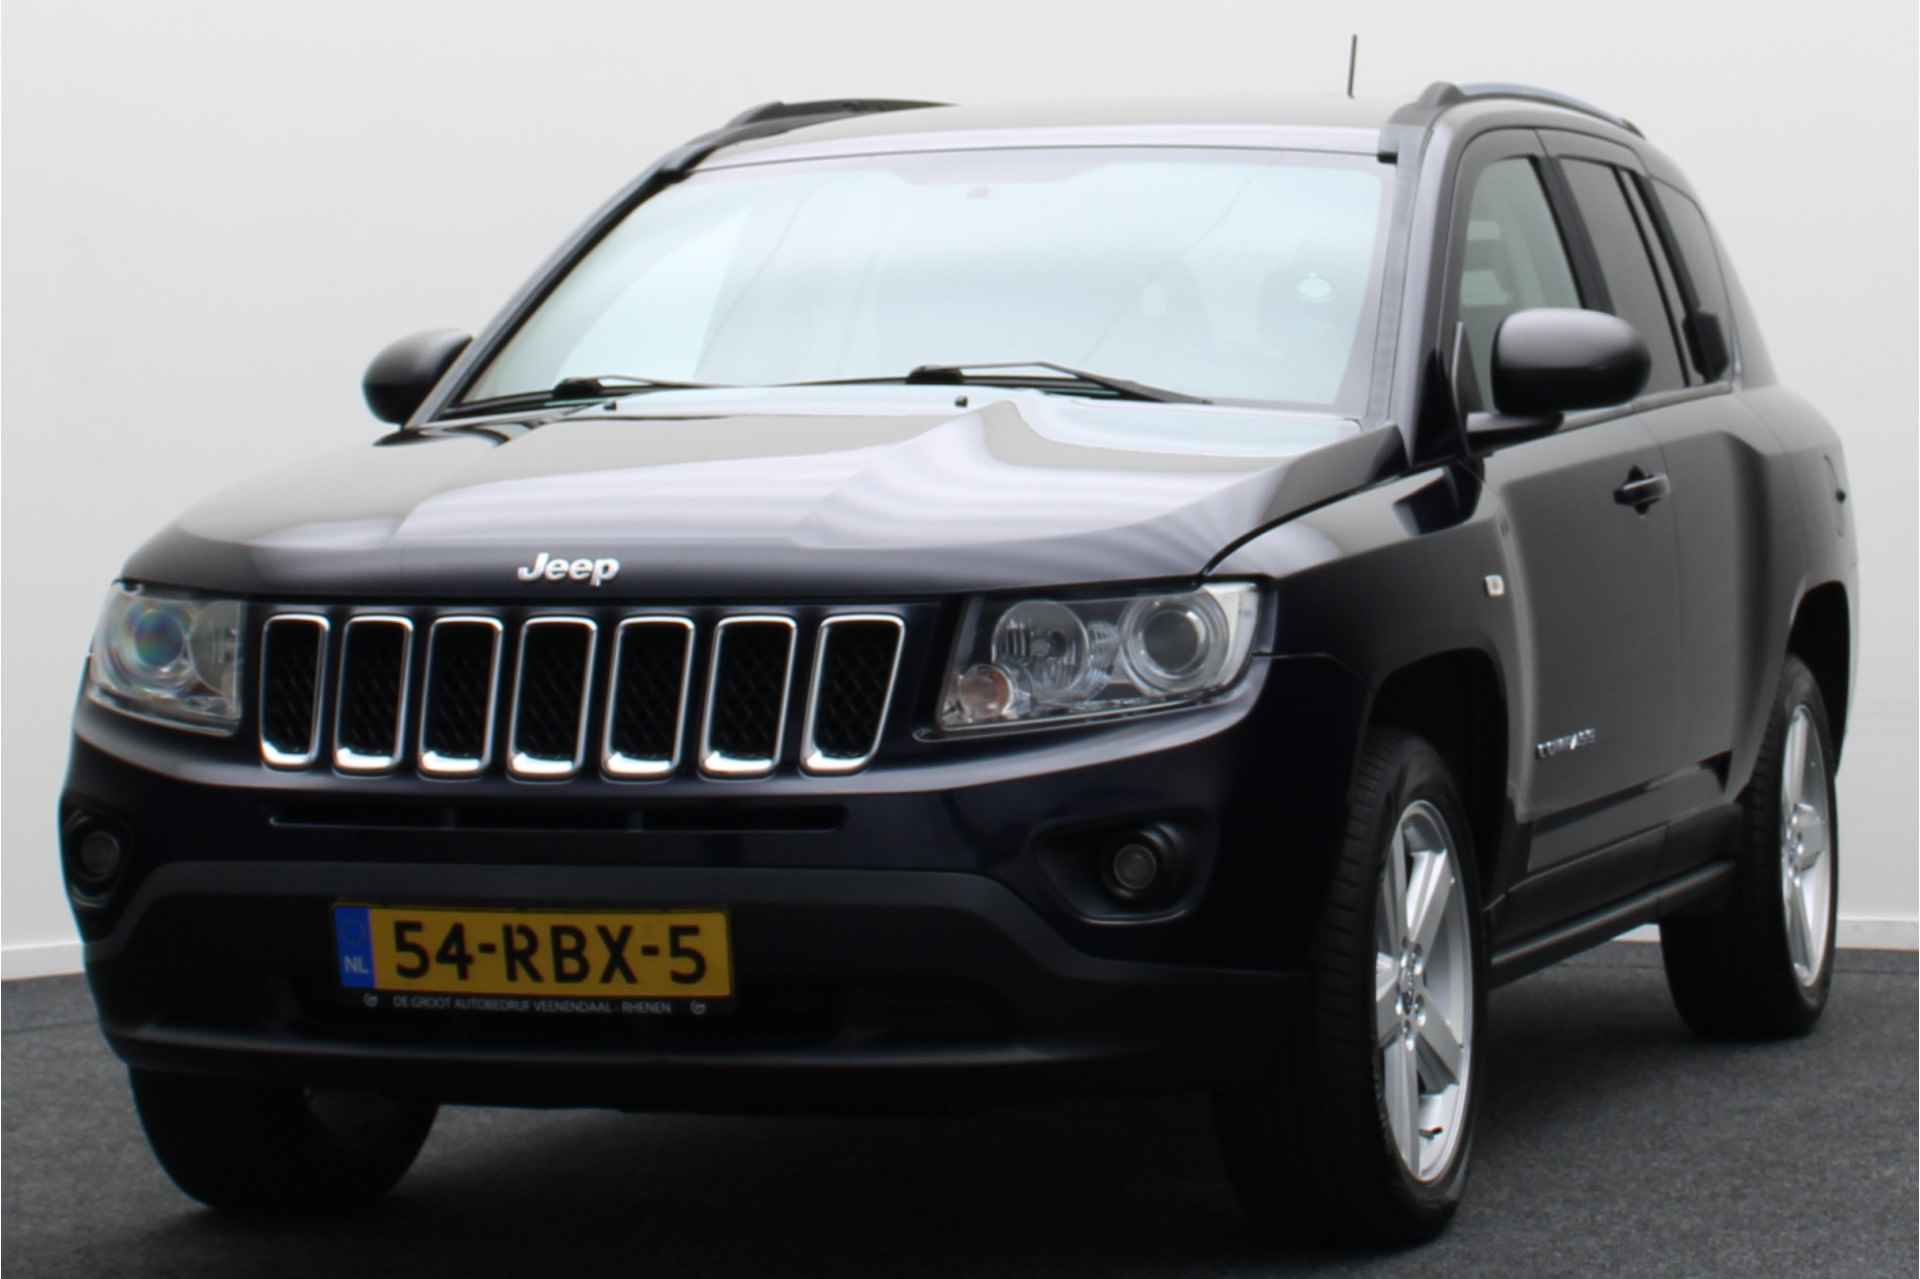 Jeep Compass 2.4 Limited 4WD Automaat Leer, Stoelverw., Climate, Cruise, Navigatie, Bluetooth, 18'' - 21/36